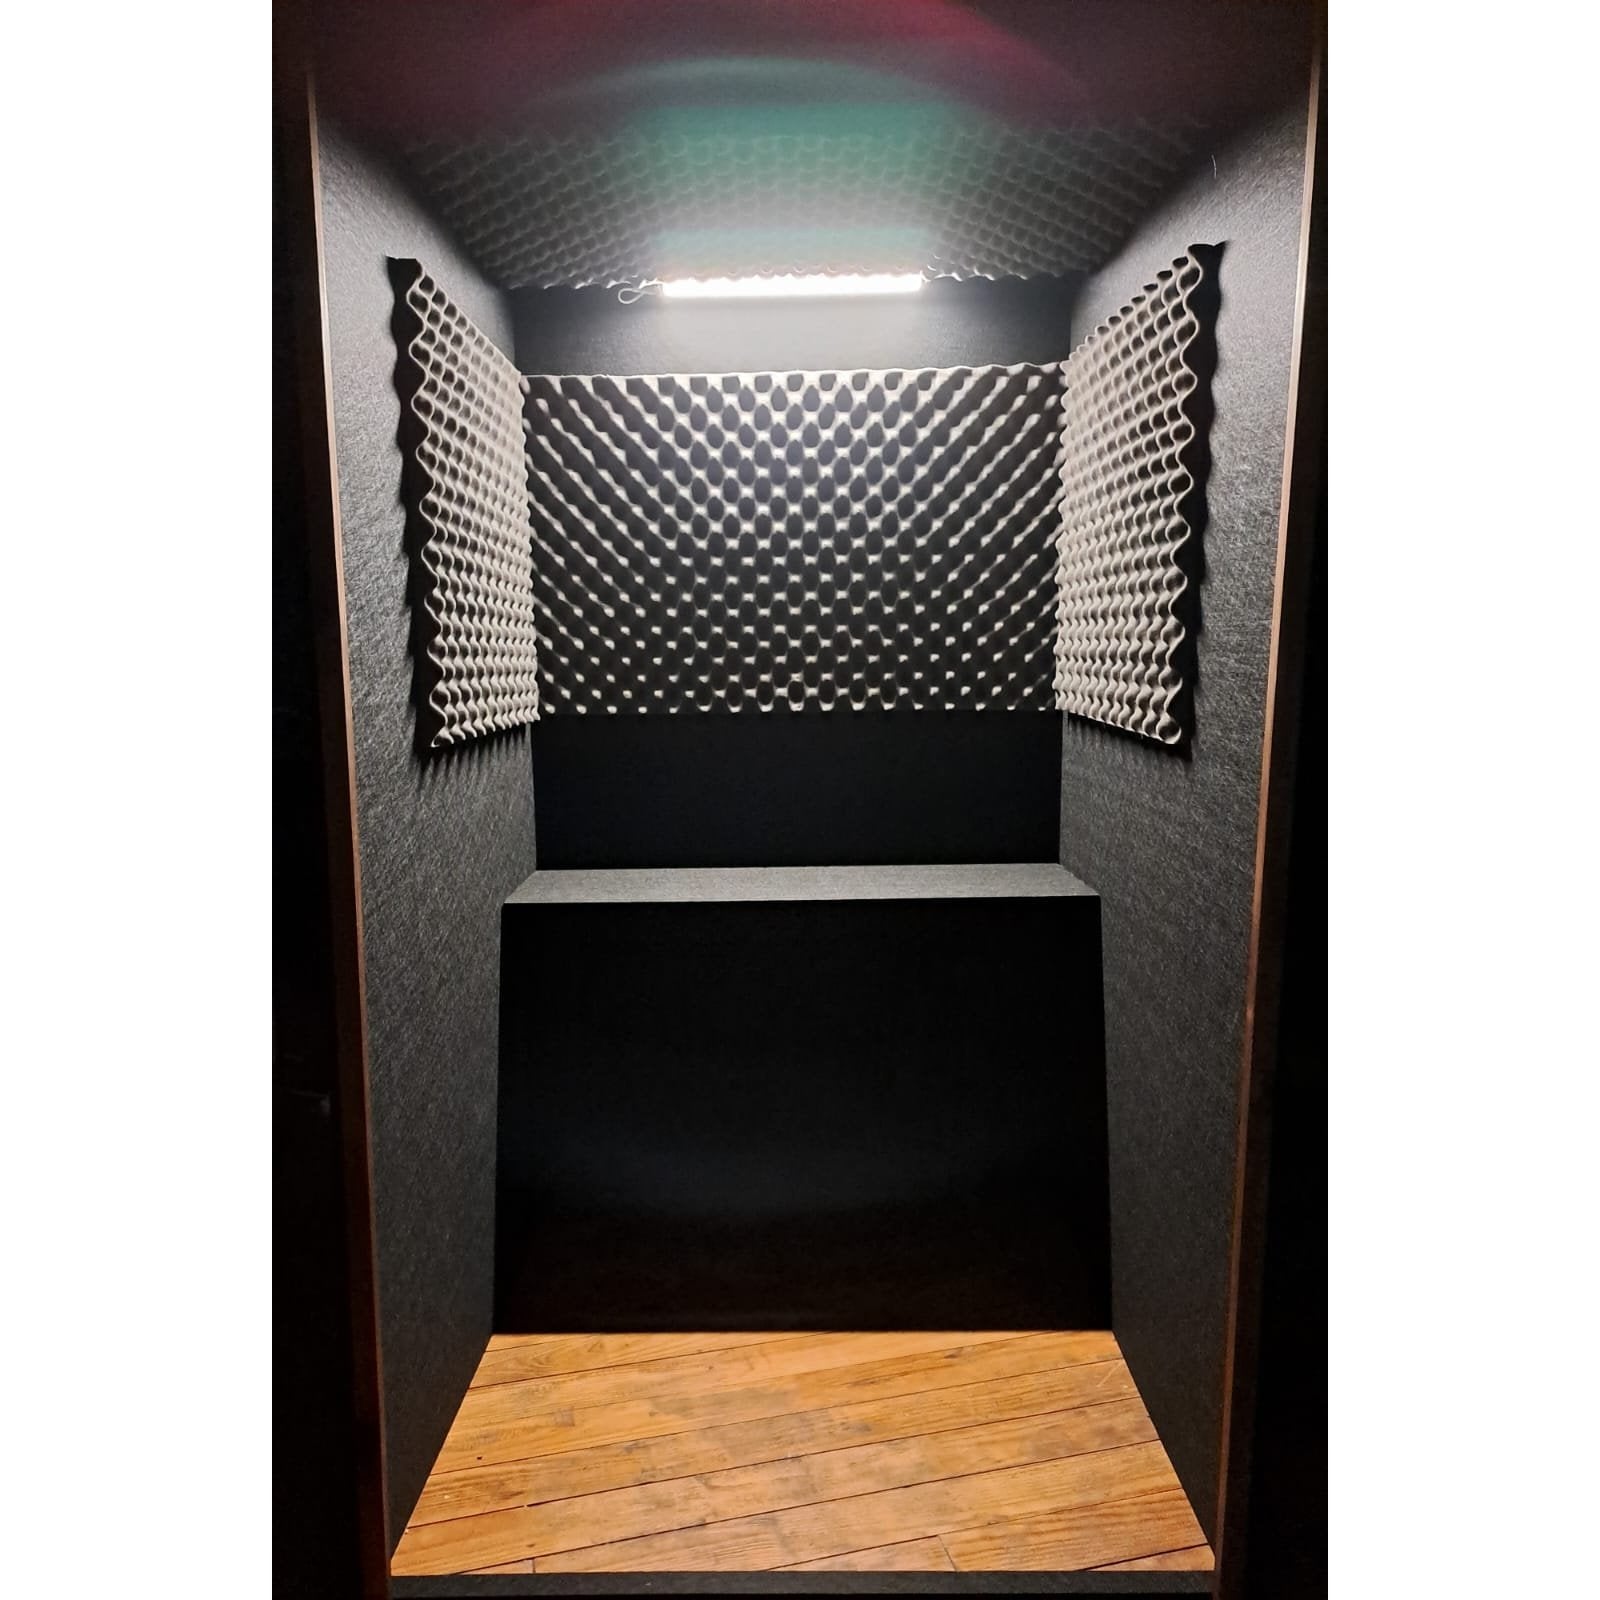 Magnificent Vocal Booth